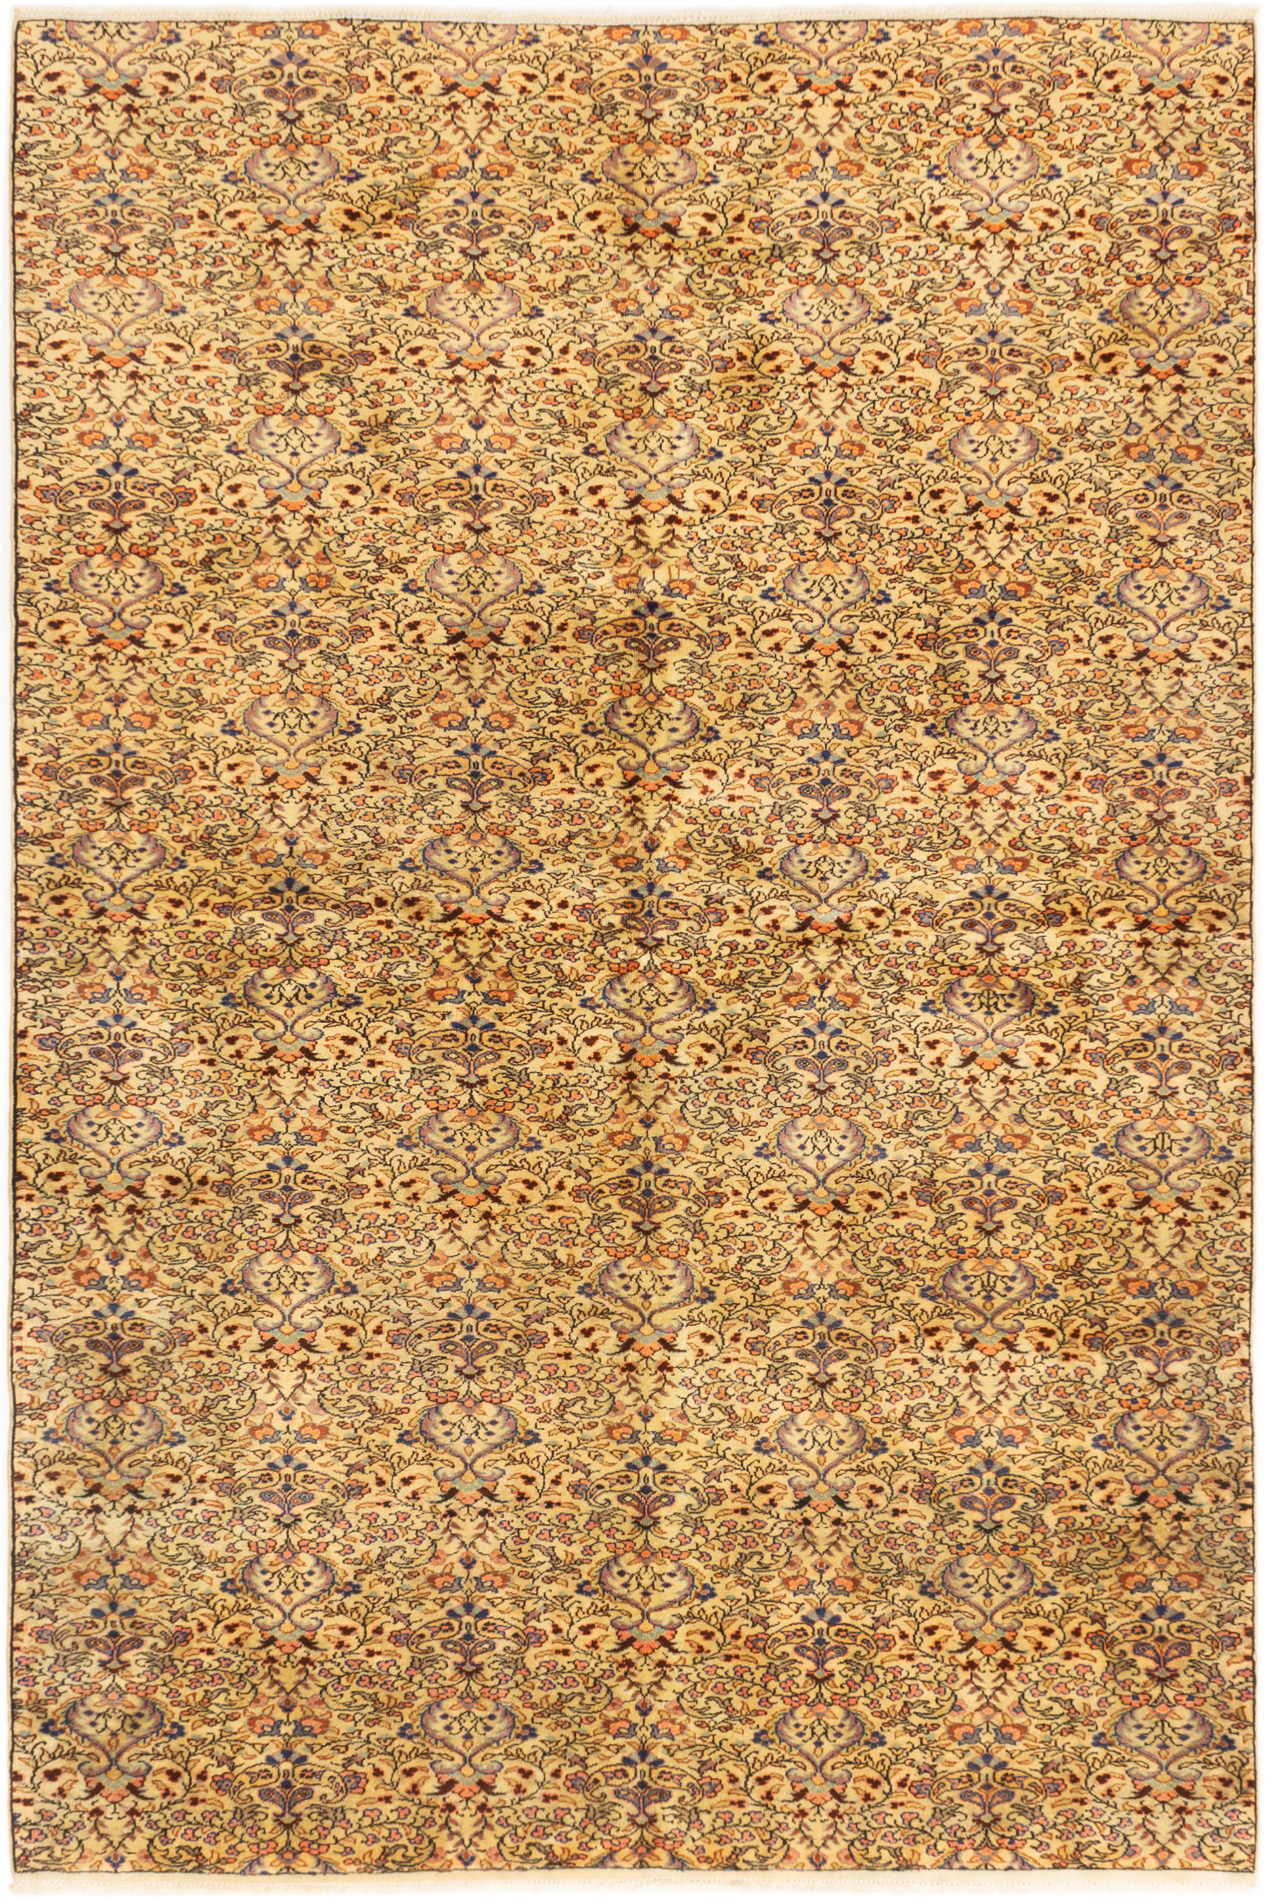 Hand-knotted Keisari Cream Wool Rug 6'7" x 9'9" Size: 6'7" x 9'9"  